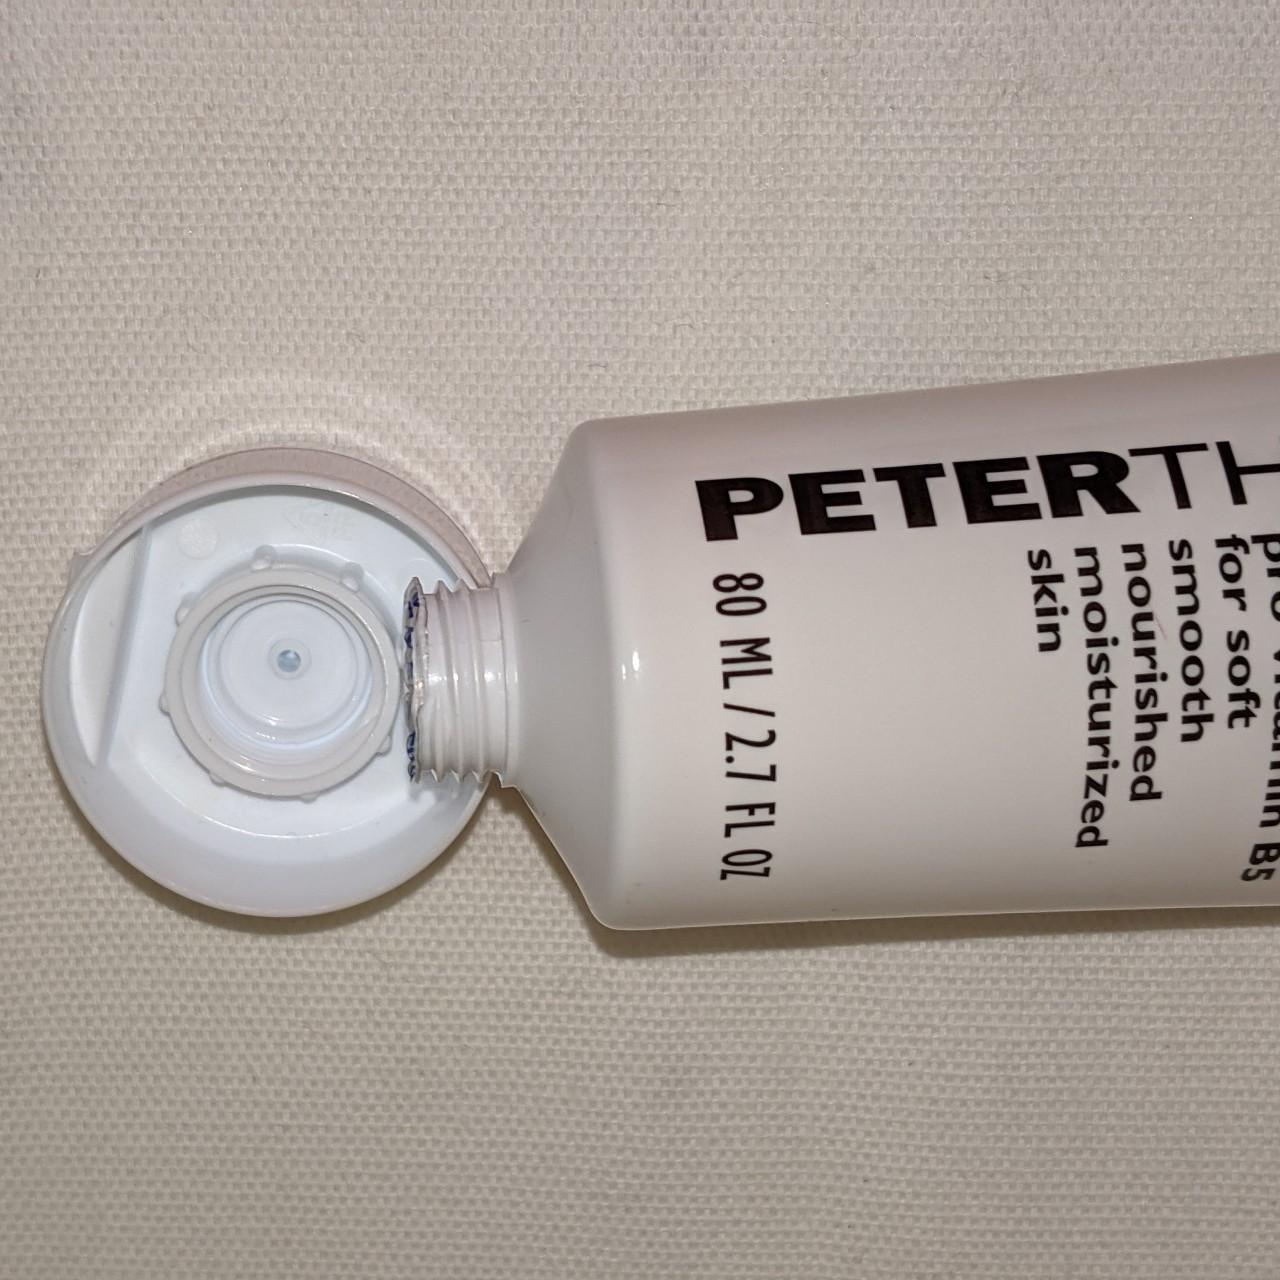 Product Image 4 - Peter Thomas Roth Body Lotion

Sealed